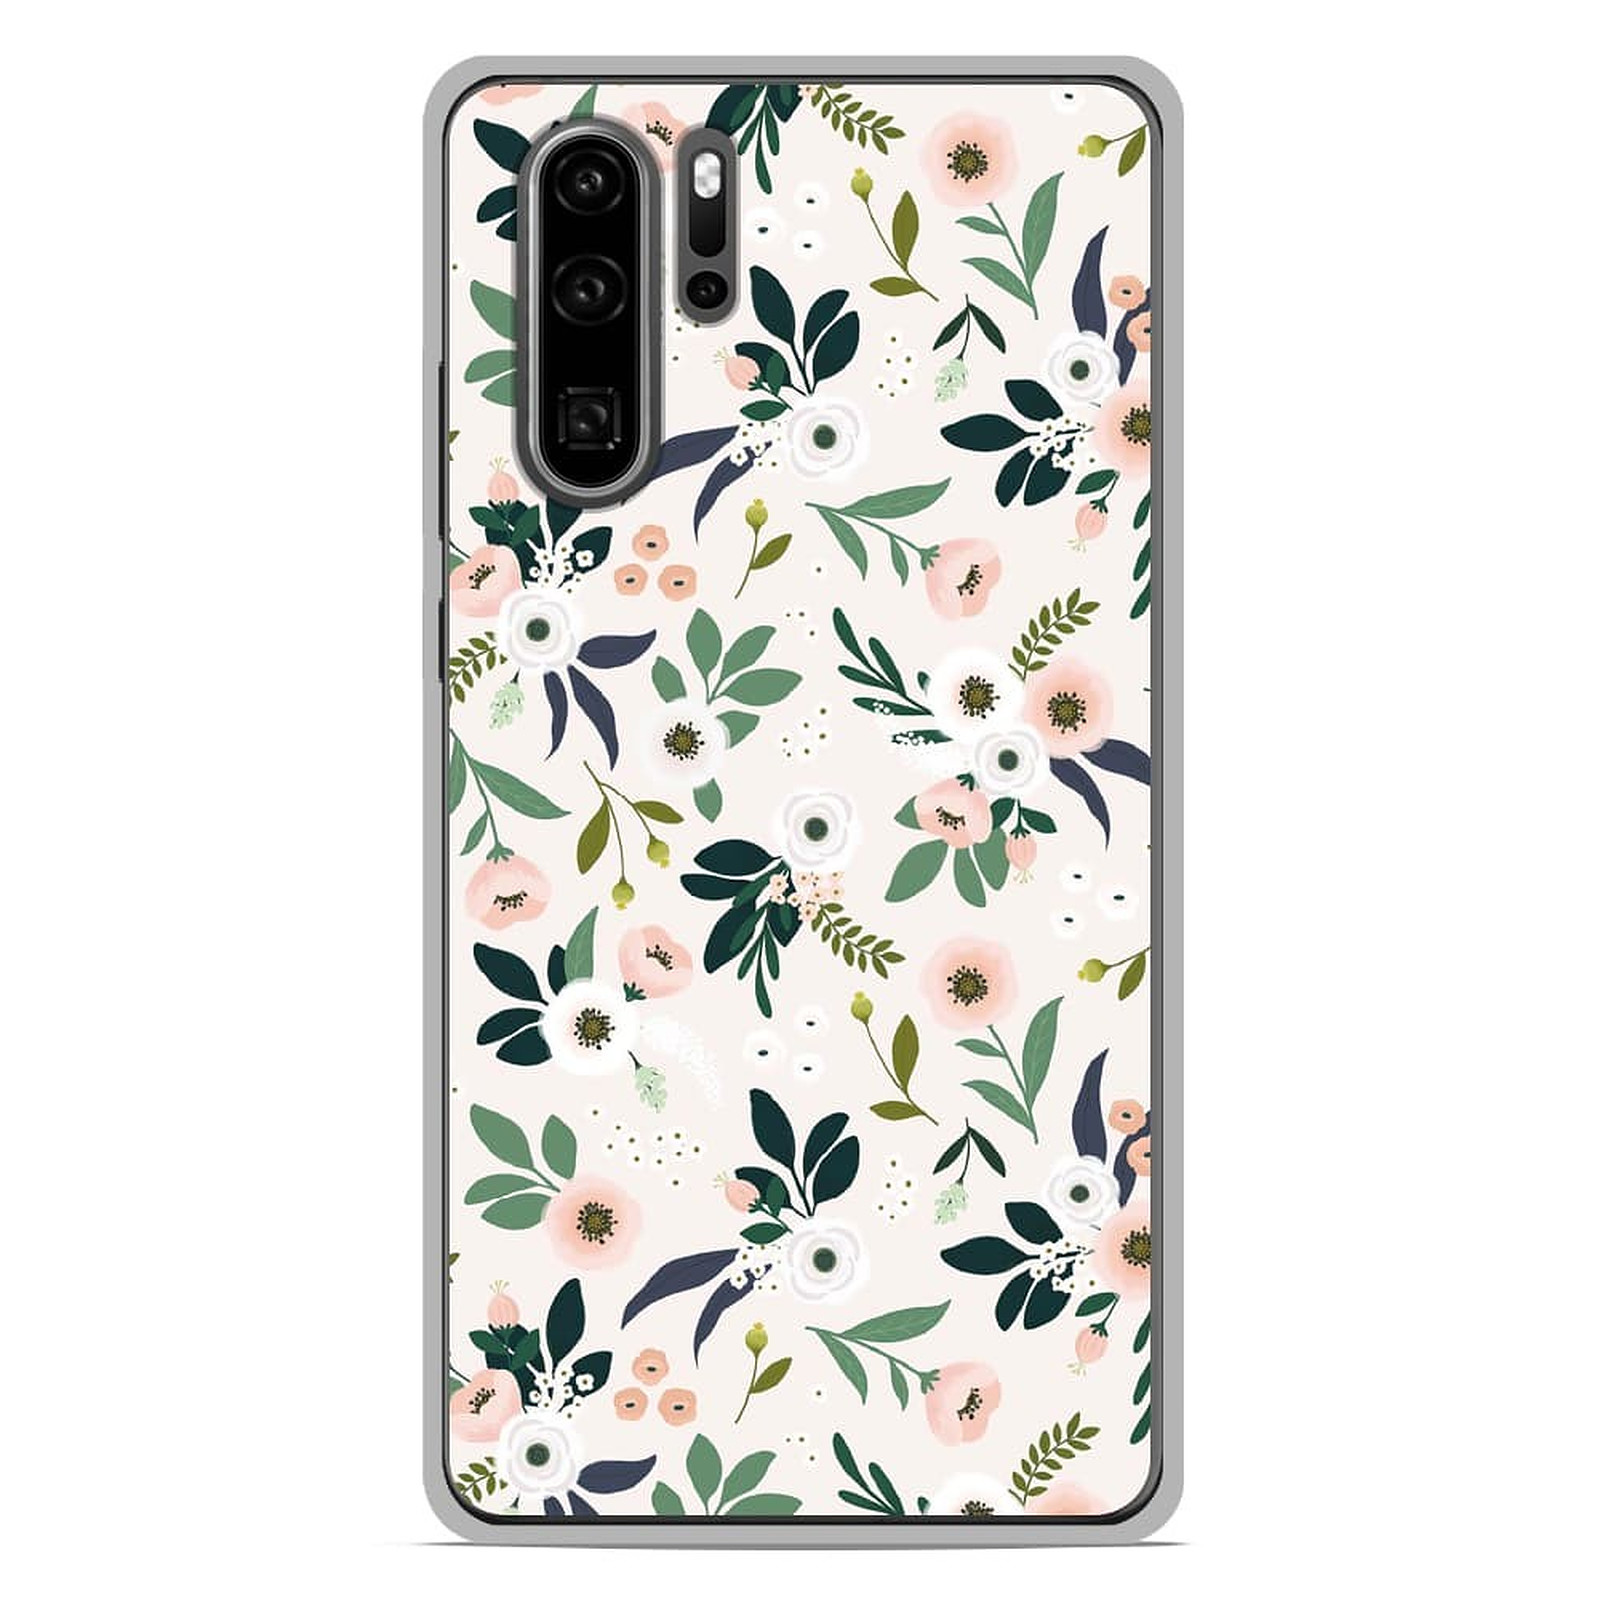 1001 Coques Coque silicone gel Huawei P30 Pro motif Flowers - Coque telephone 1001Coques